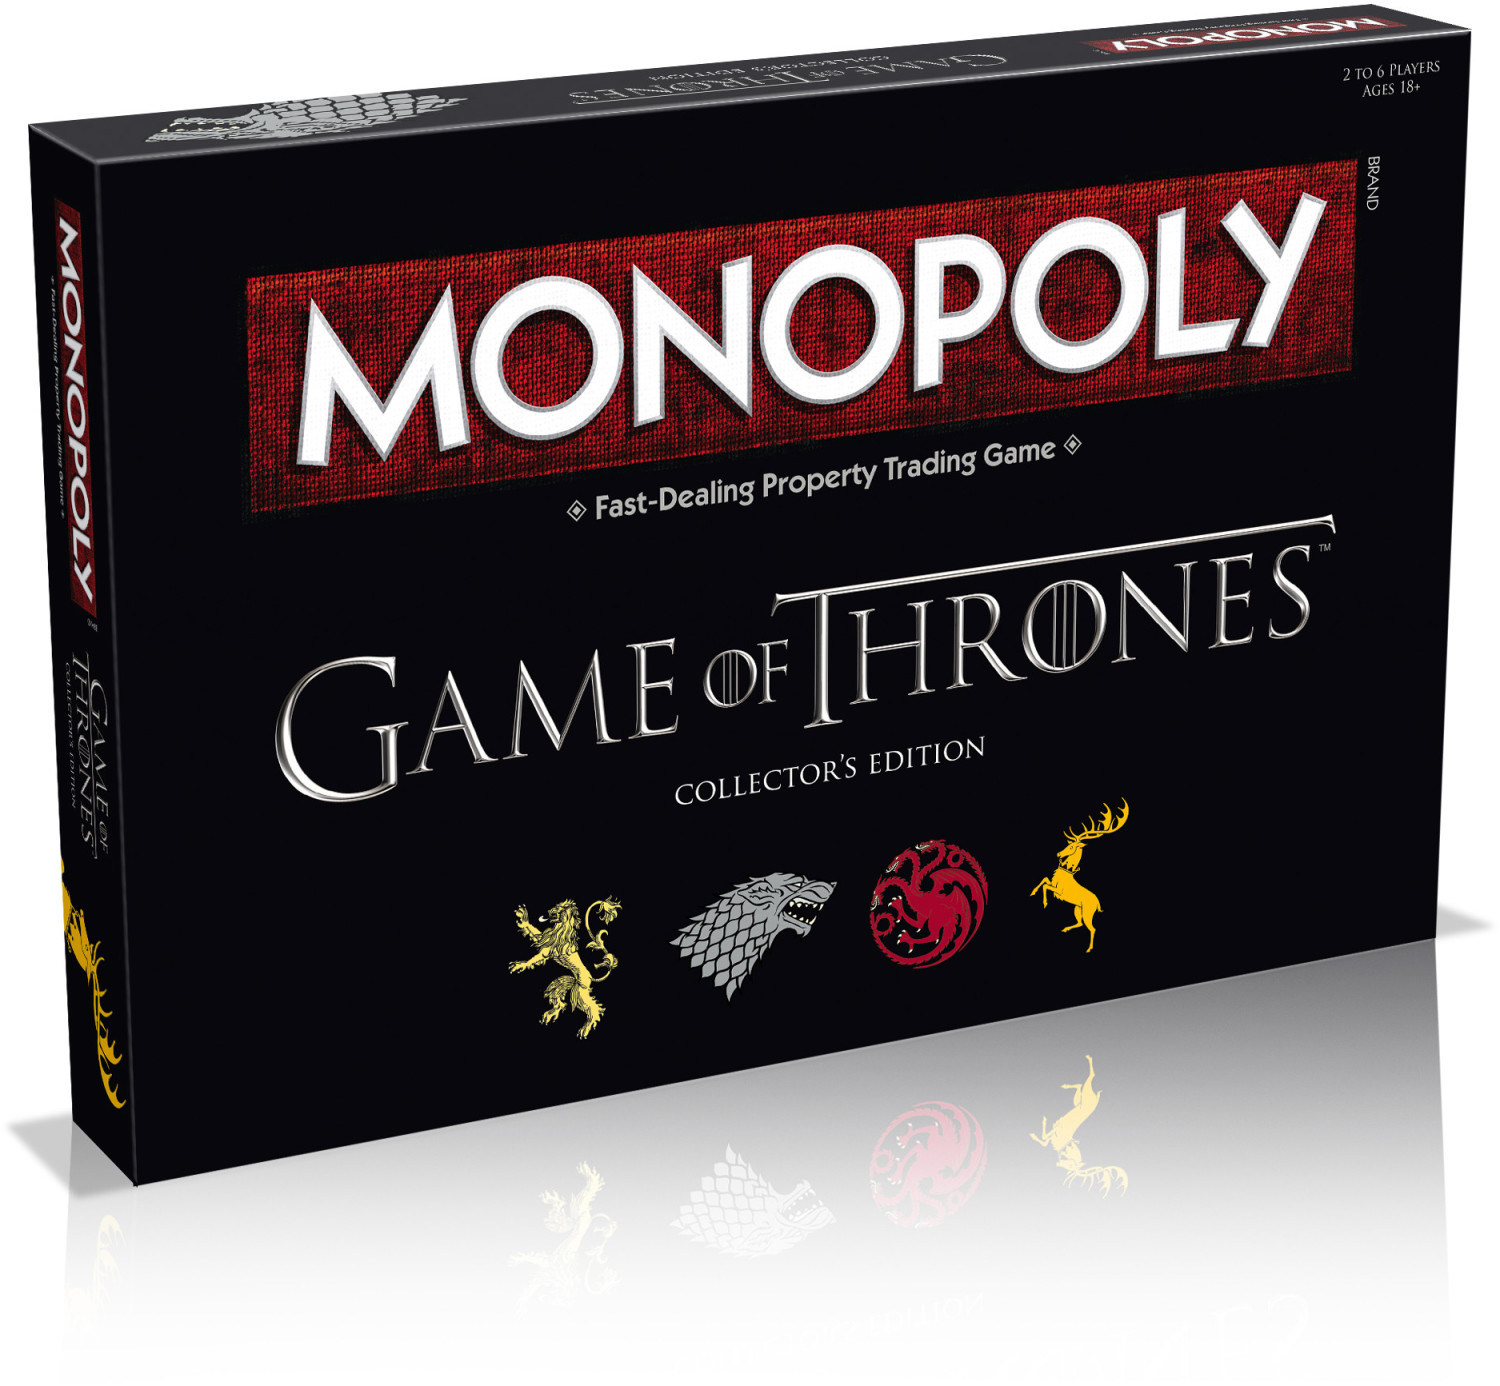 Monopoly Game of Thrones Collector's Edition (German)